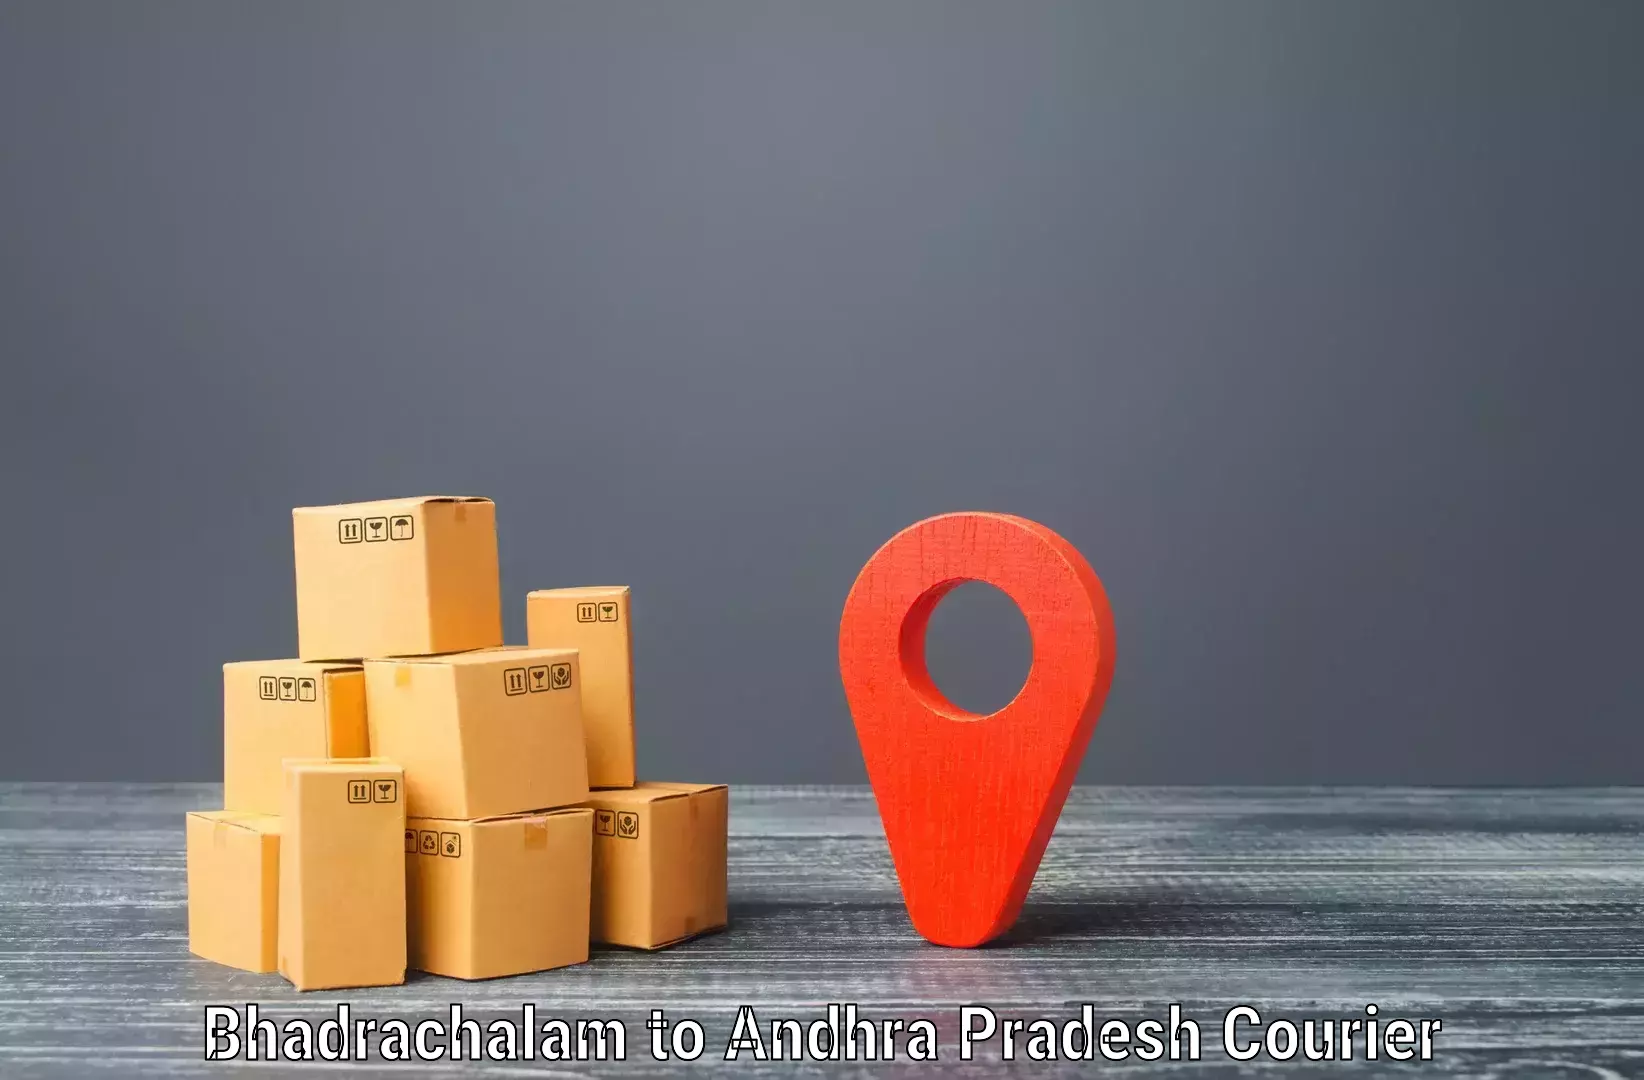 Premium courier solutions in Bhadrachalam to Challapalli